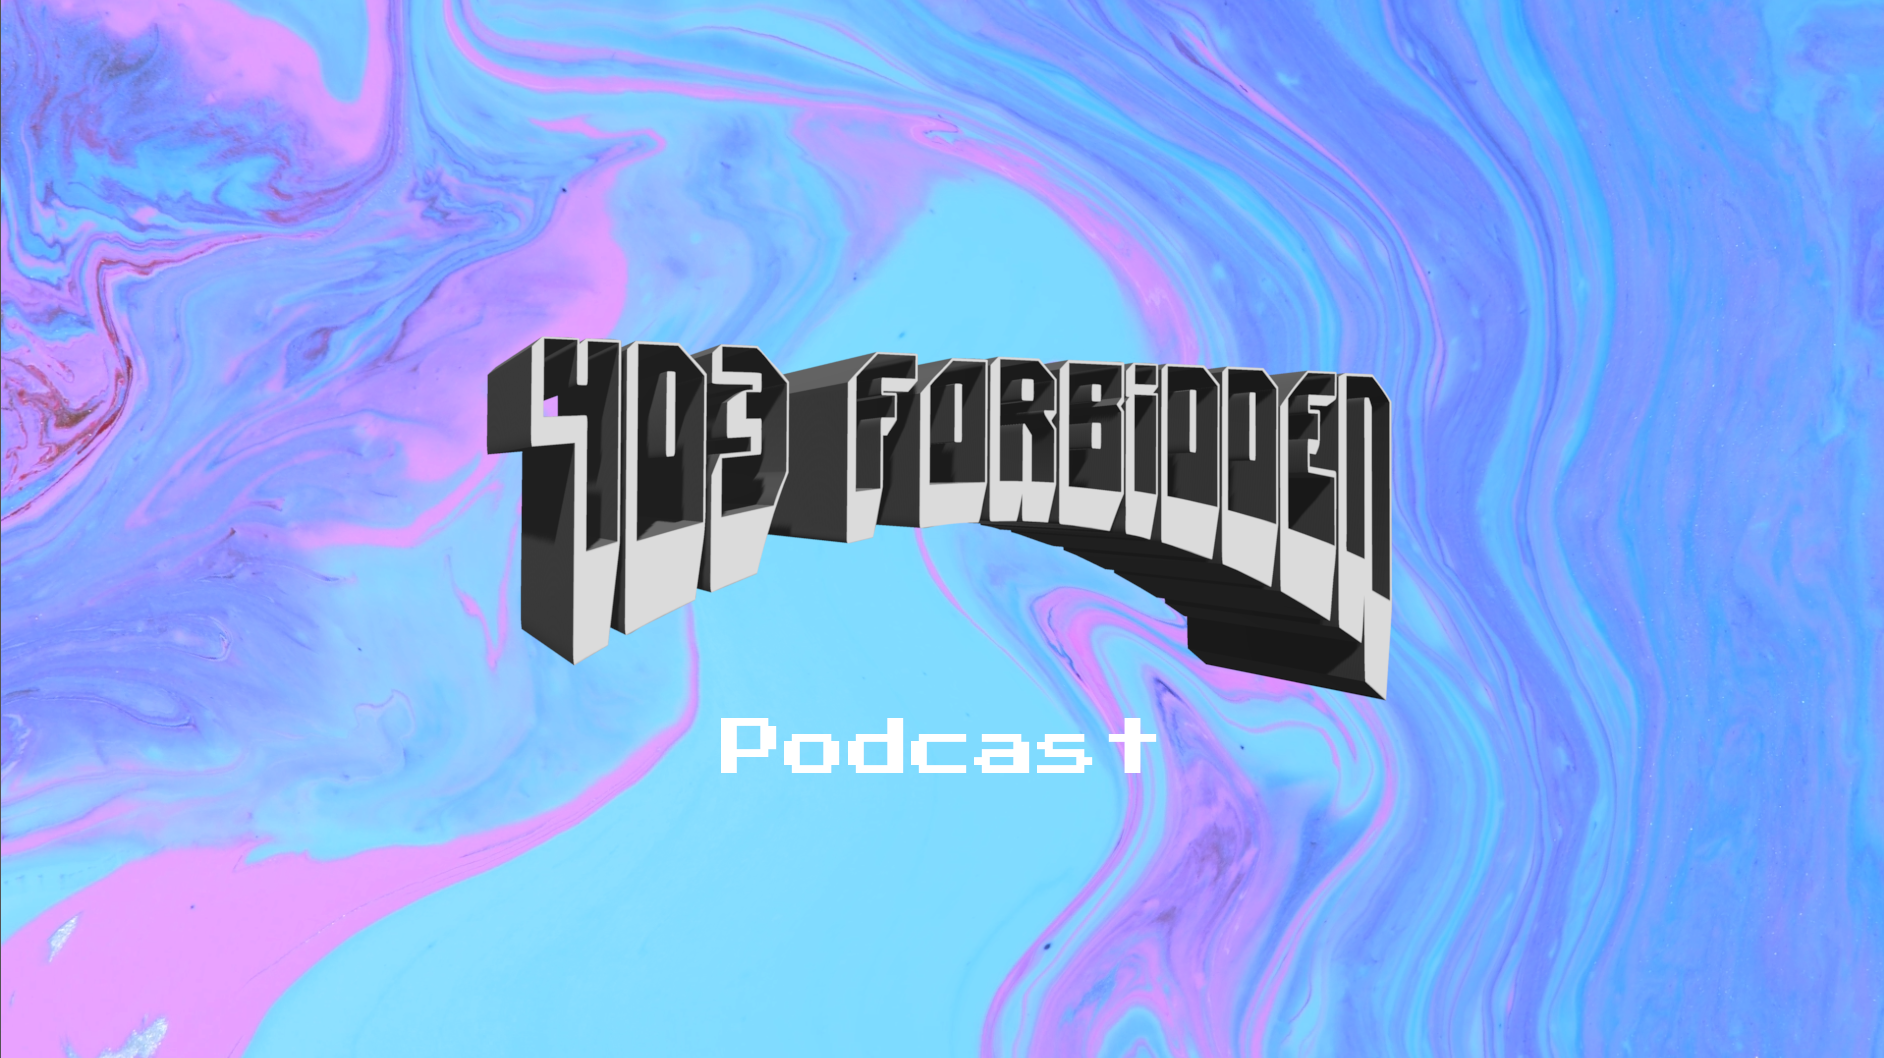 A digital illustration of the text 403 Forbidden Podcast